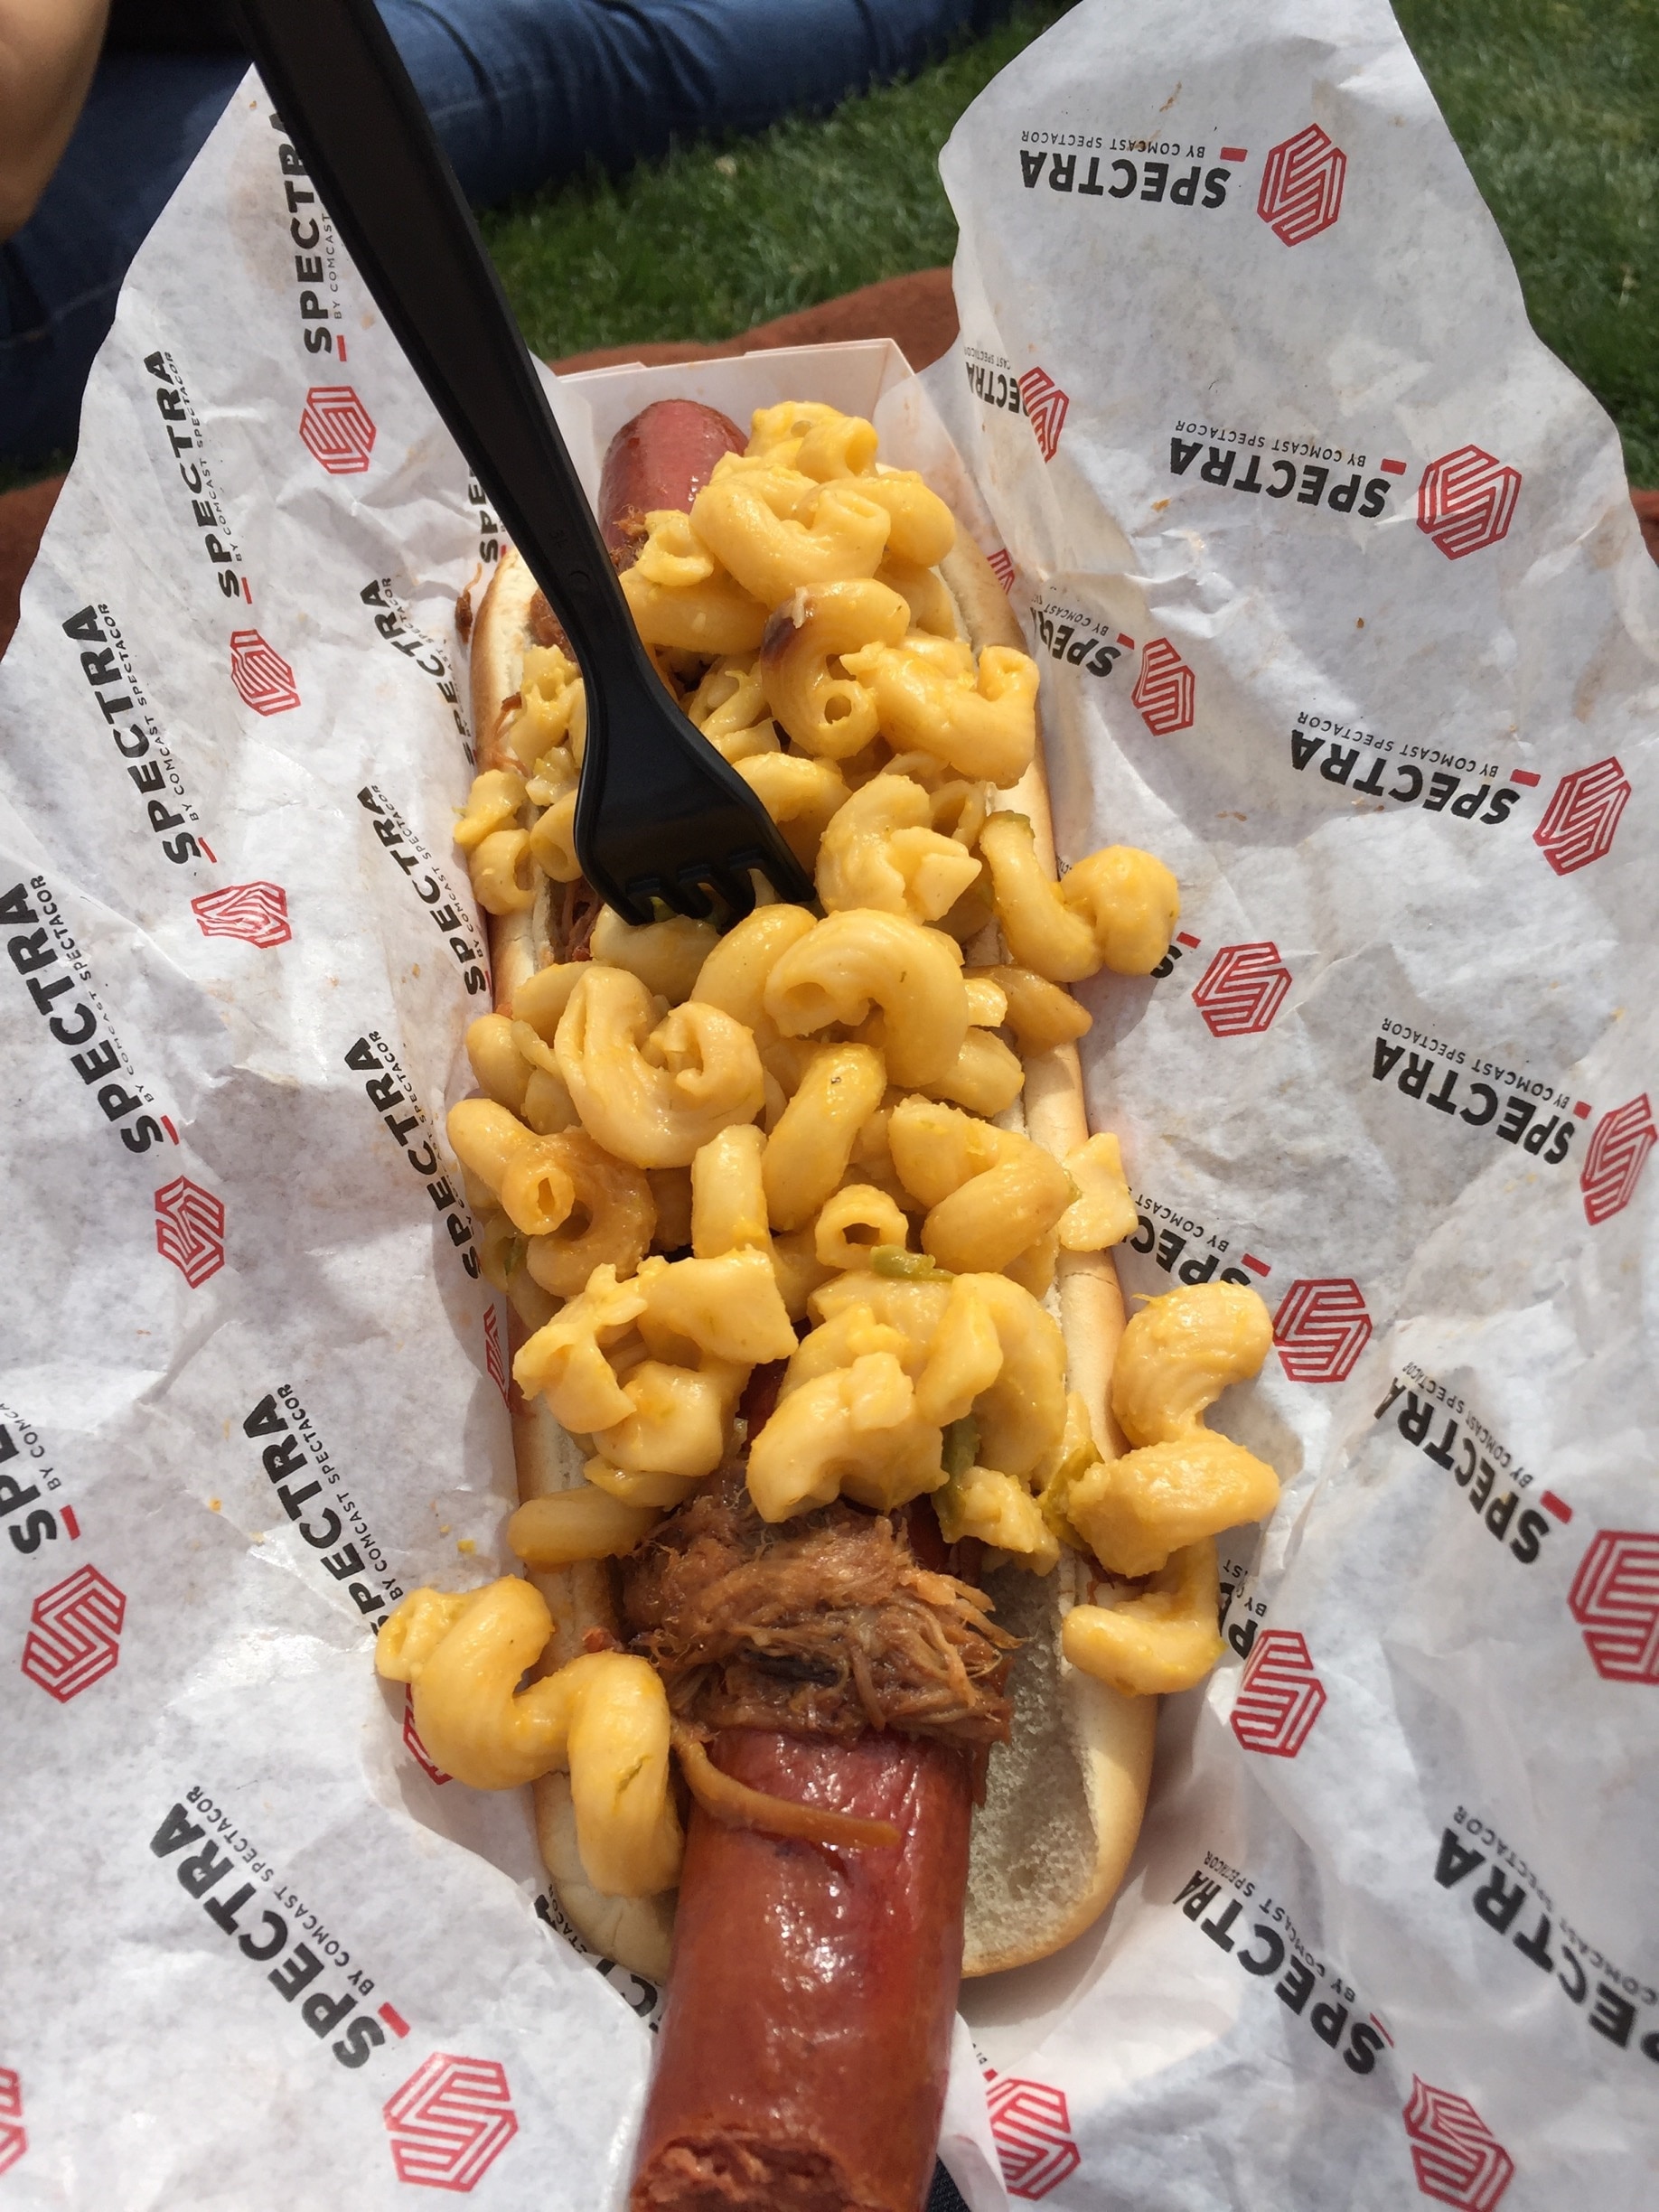 Looking for some over the top hot dogs? Check out these half pound franks topped with pulled pork and green chili Mac and cheese while catching a spring training game. 